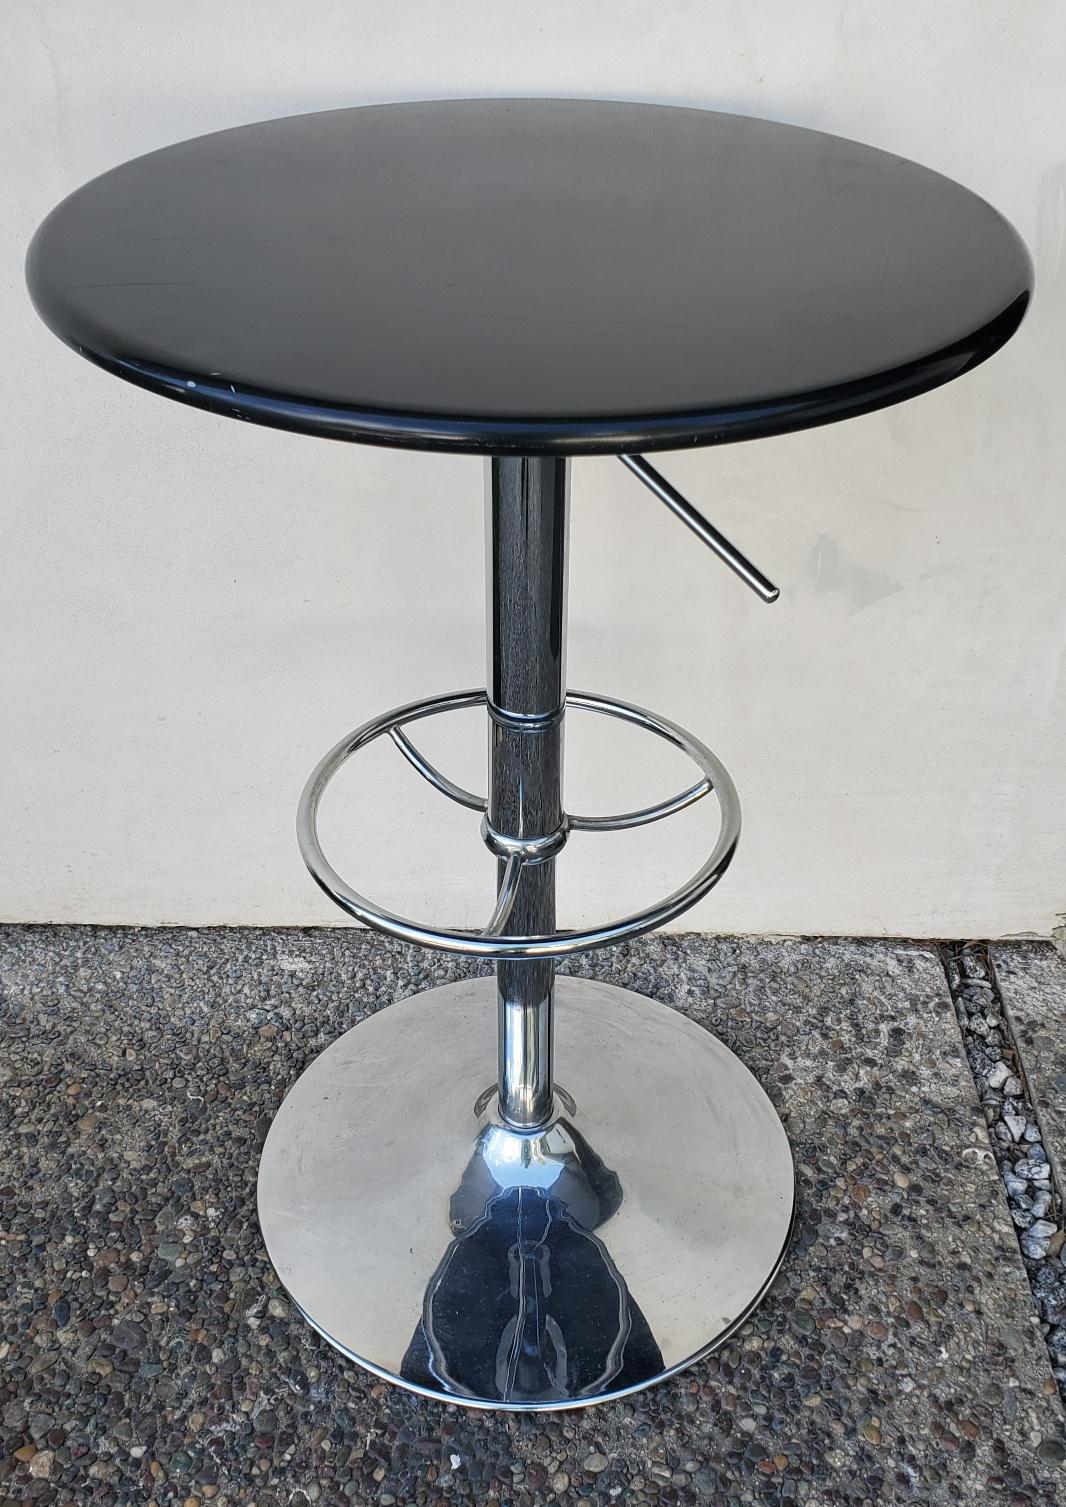 Set of Adjustable Contemporary Modern Cocktail Chrome Cocktail Tables In Good Condition For Sale In Pasadena, CA